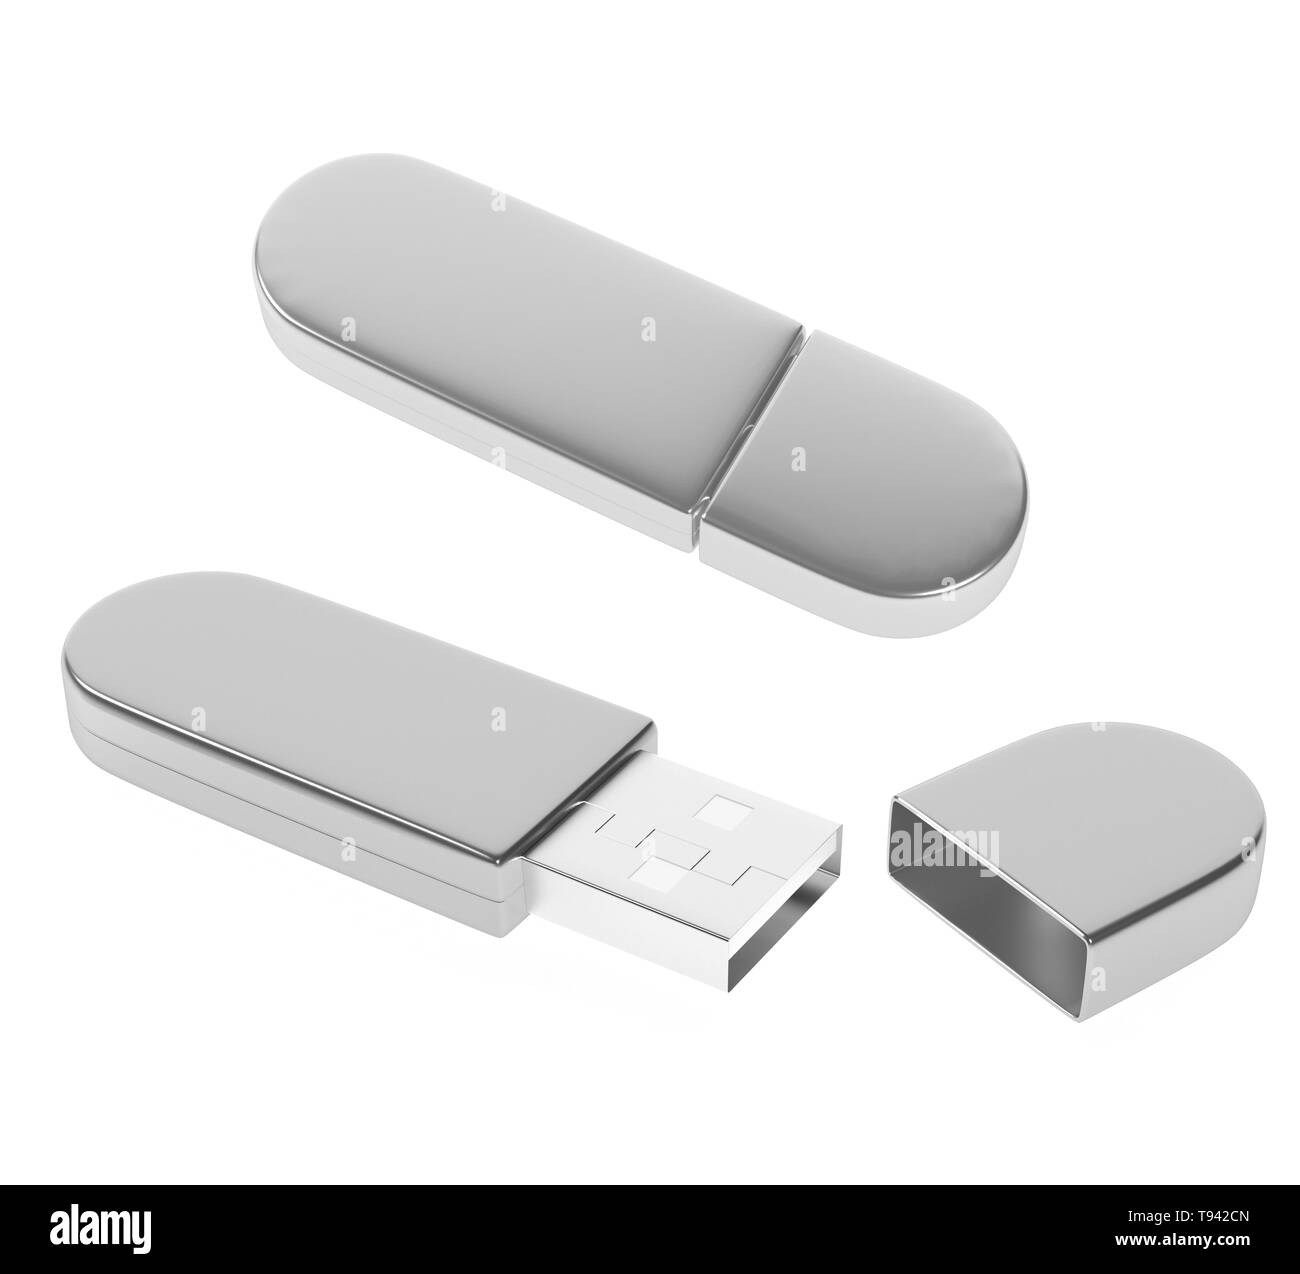 USB stick. Metal digital storage accessory. 3d rendering illustration isolated on white background Stock Photo